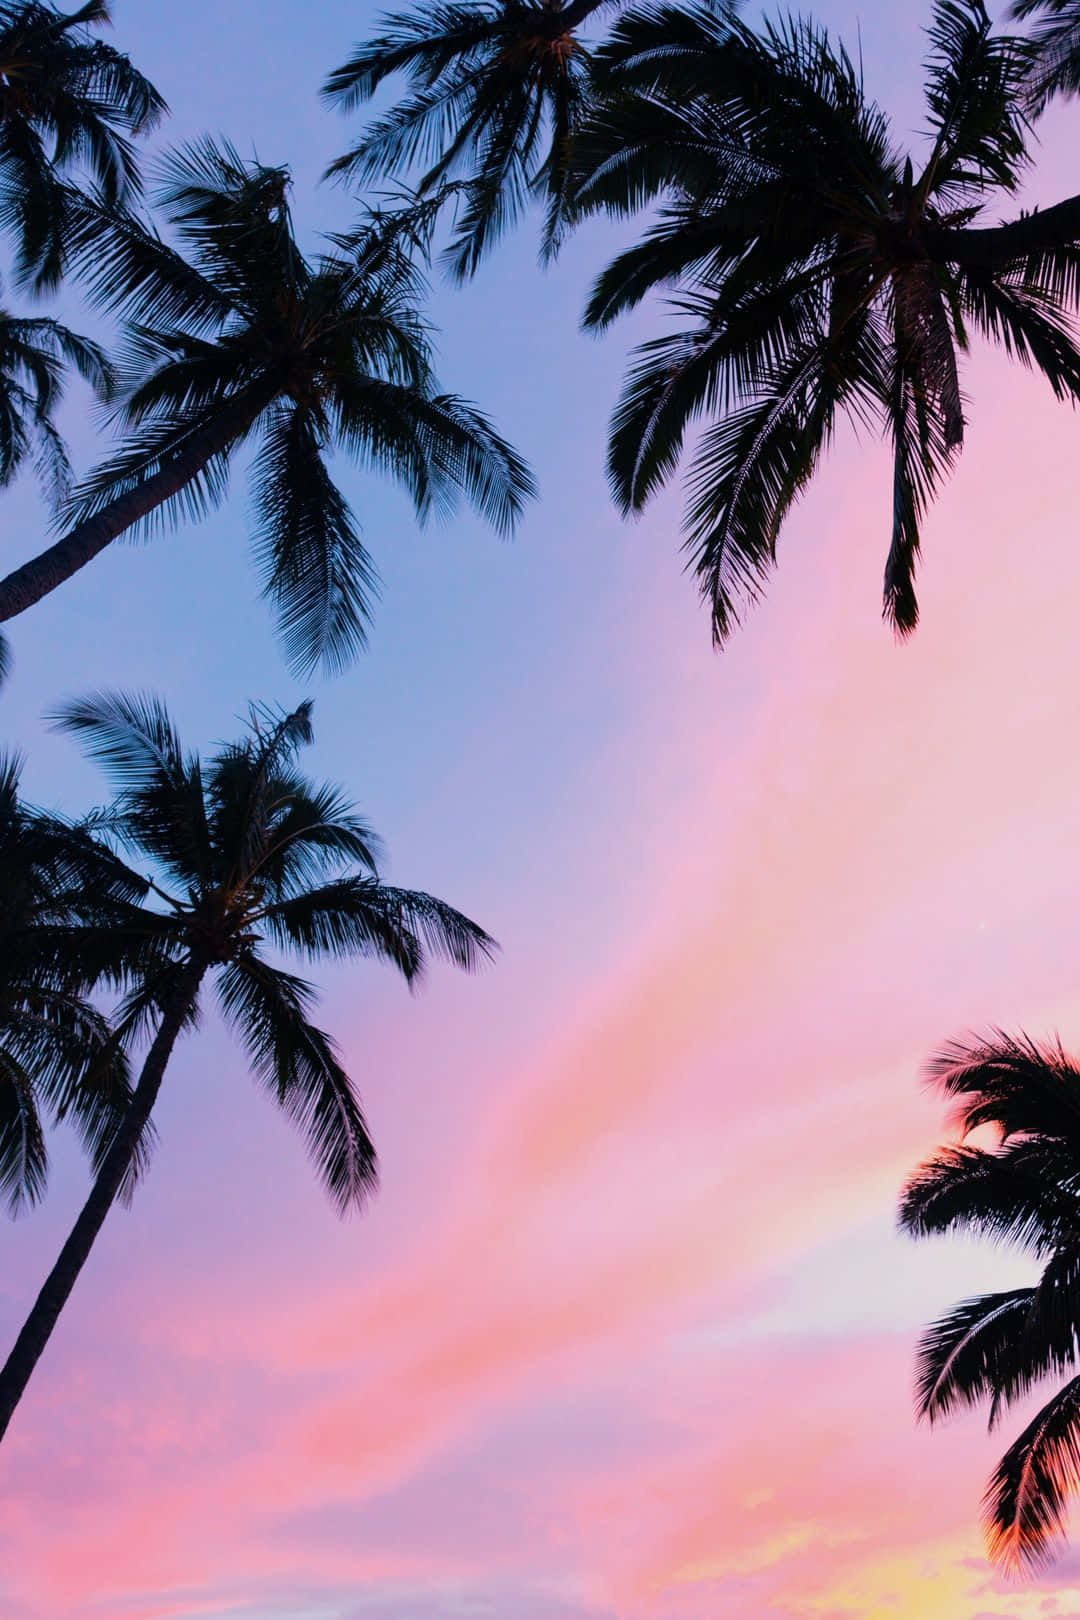 Enjoy the view of an Aesthetic Palm Tree. Wallpaper